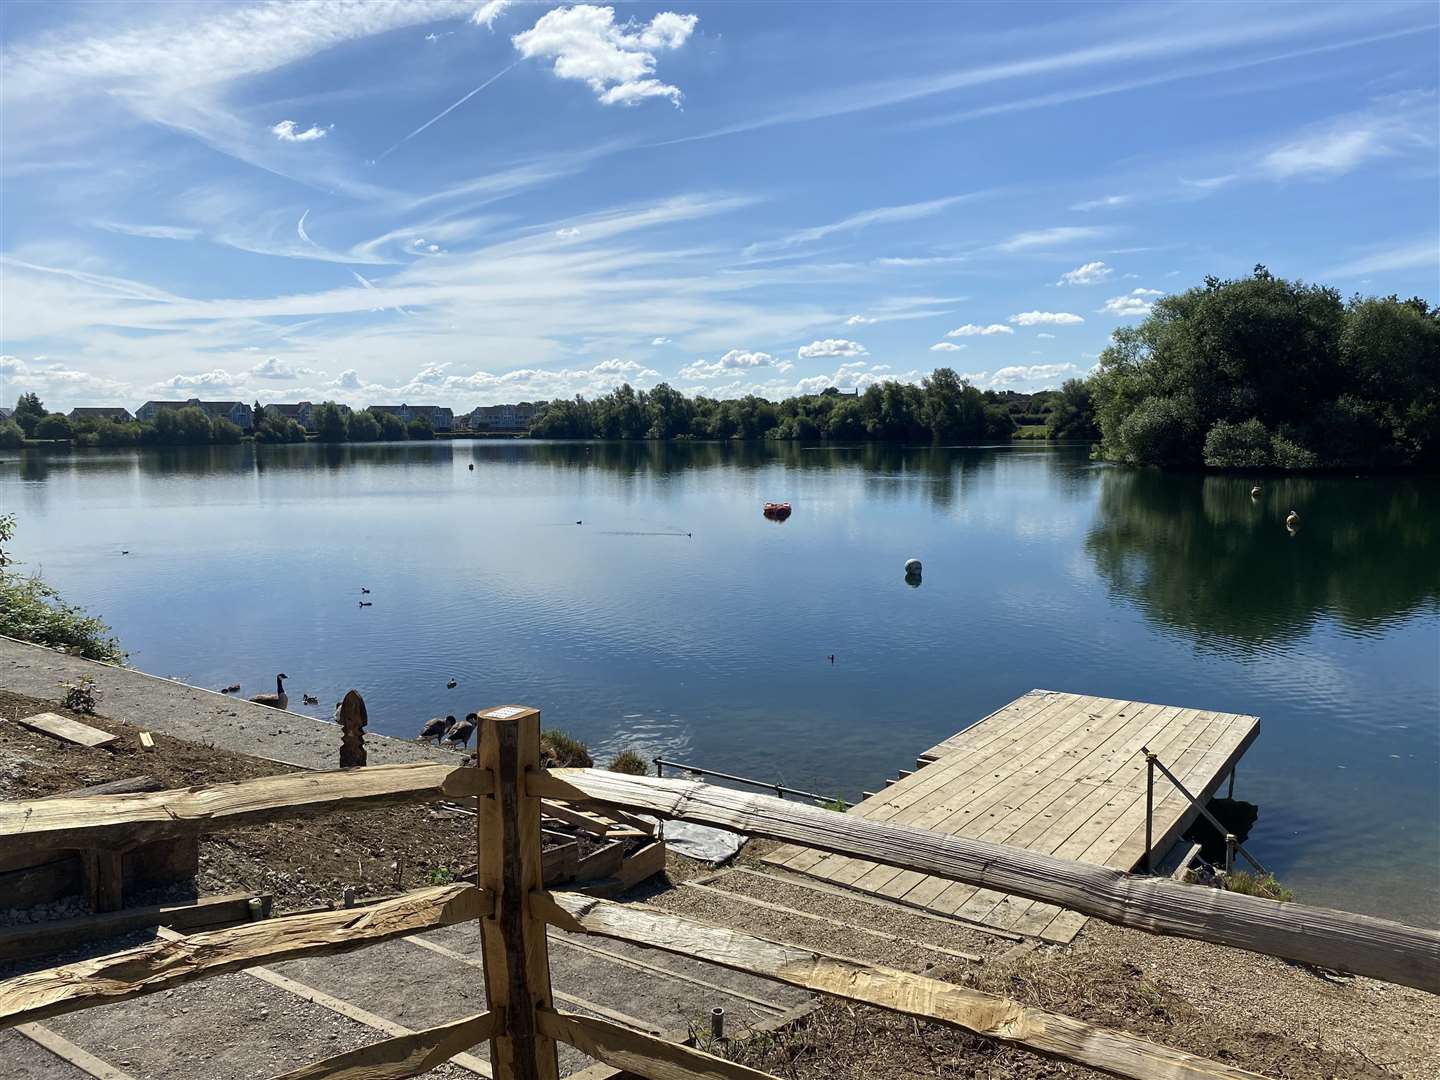 Scuba divers have searched Leybourne Lakes for missing Lola